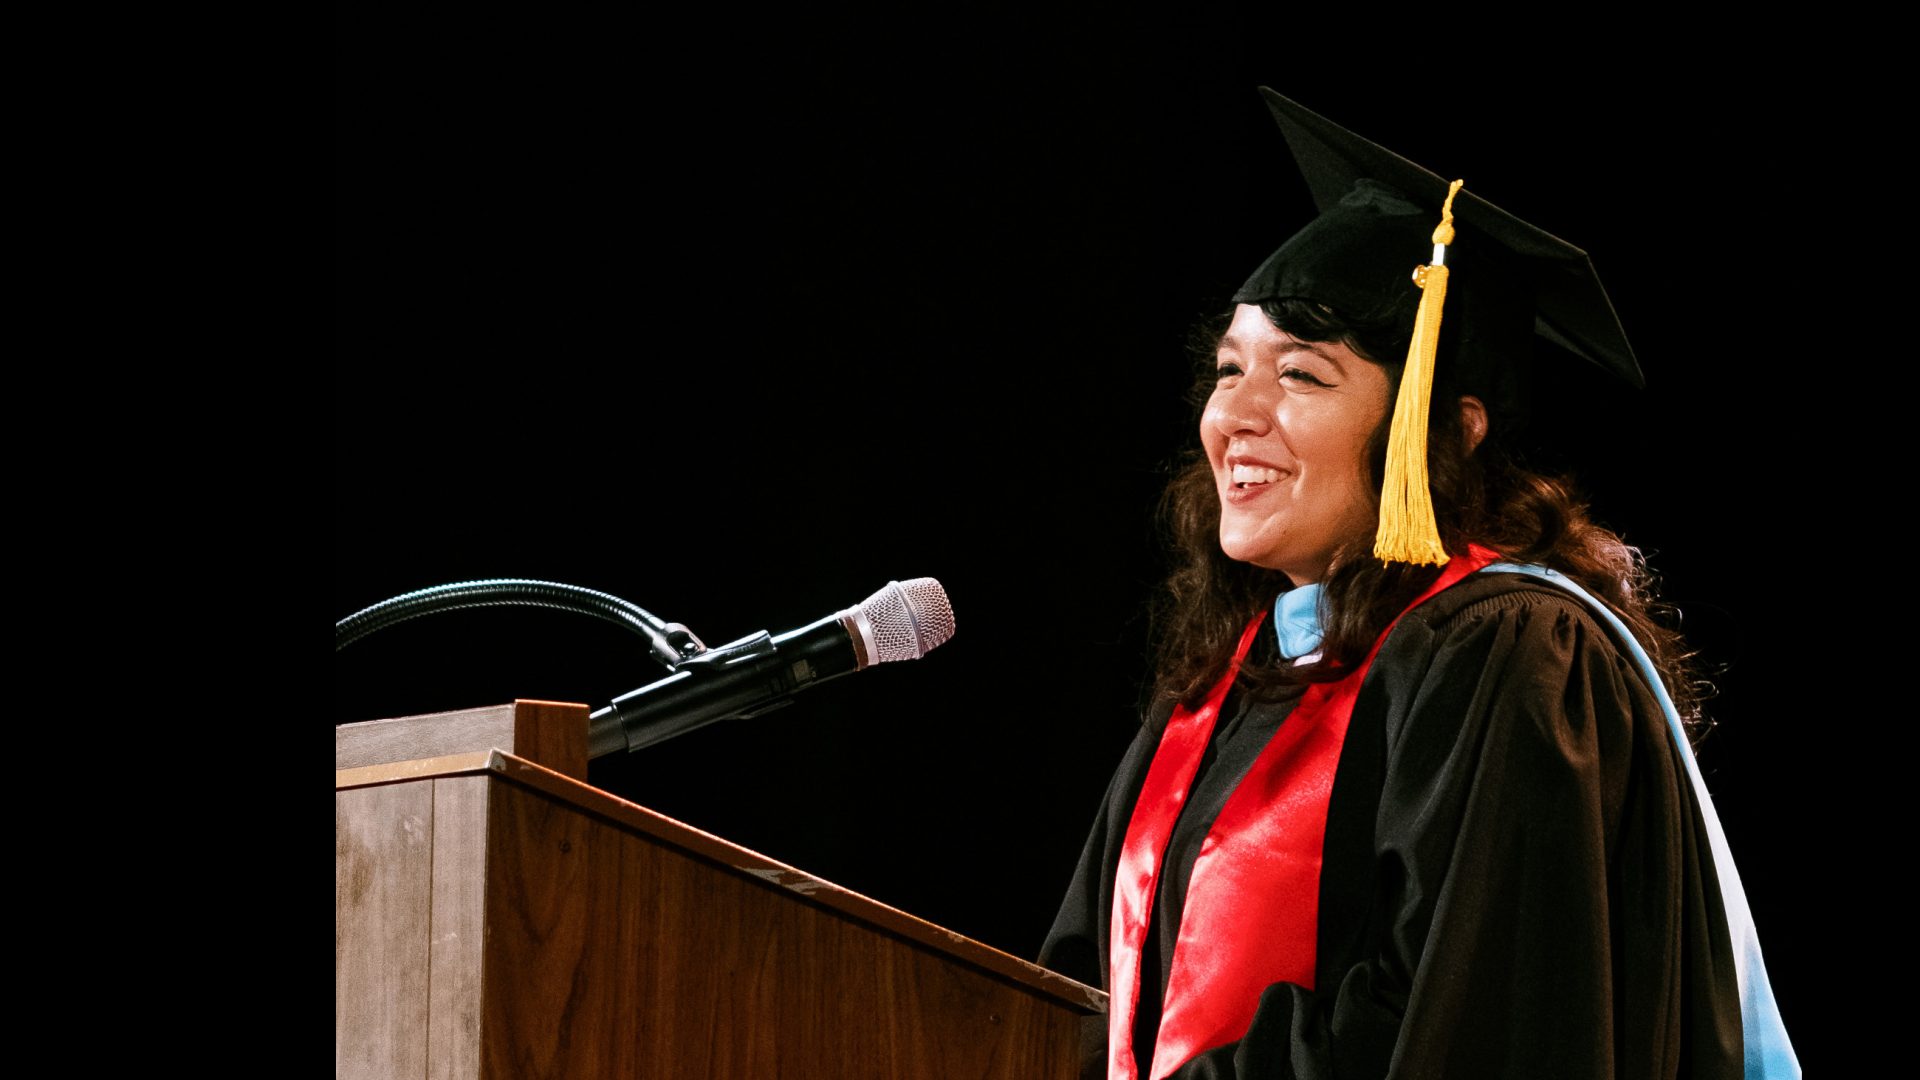 Cynthia Perez Beltethon ’14 (Hunter) addresses the Class of 2019 at Commencement.